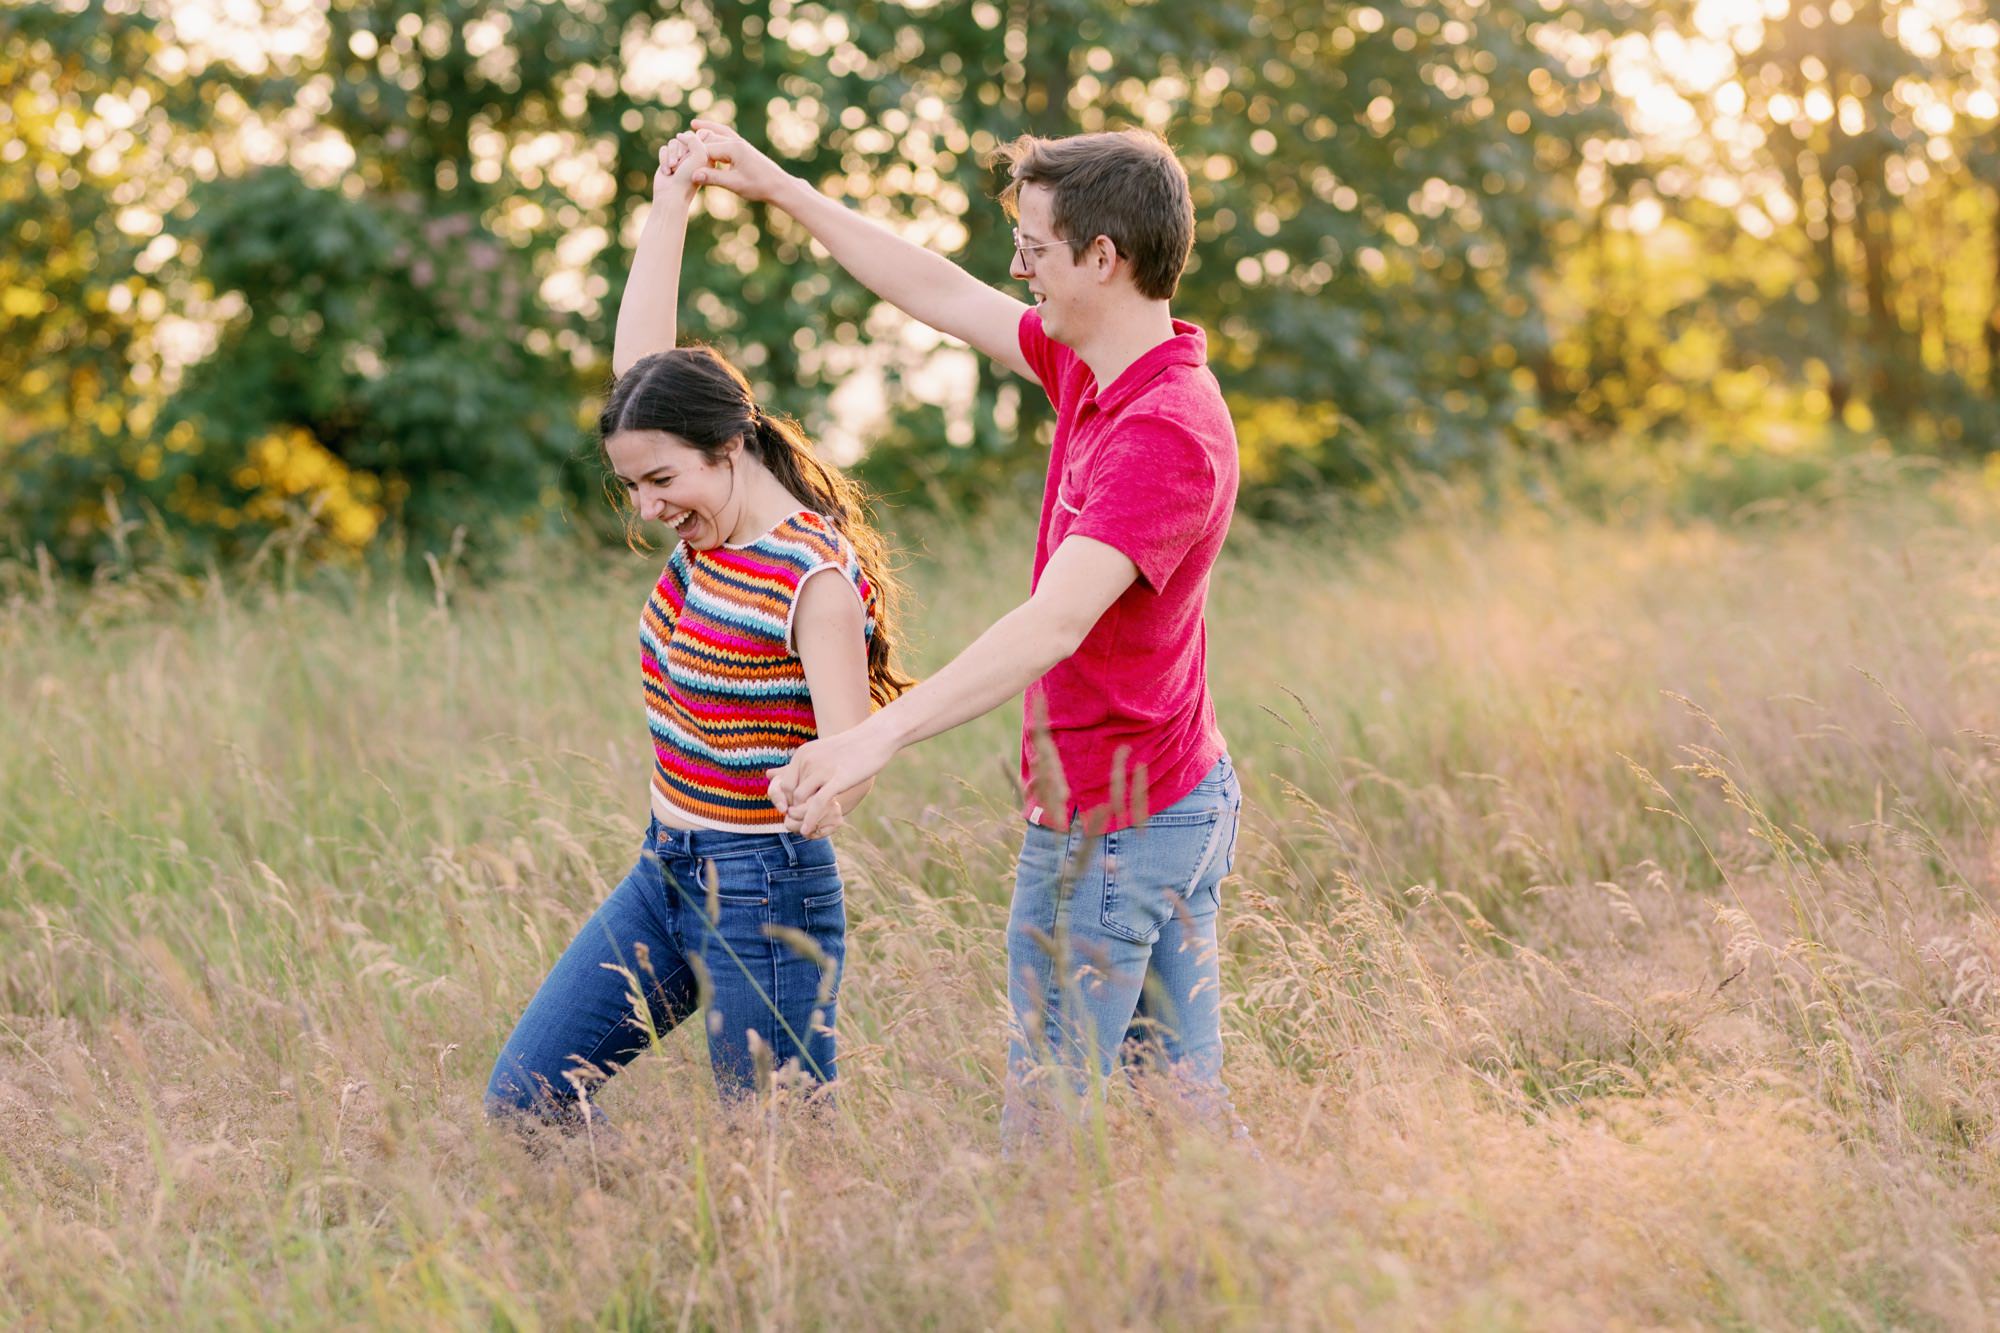 A couple holding hands and spinning in a grassy field, smiling and enjoying their time together.